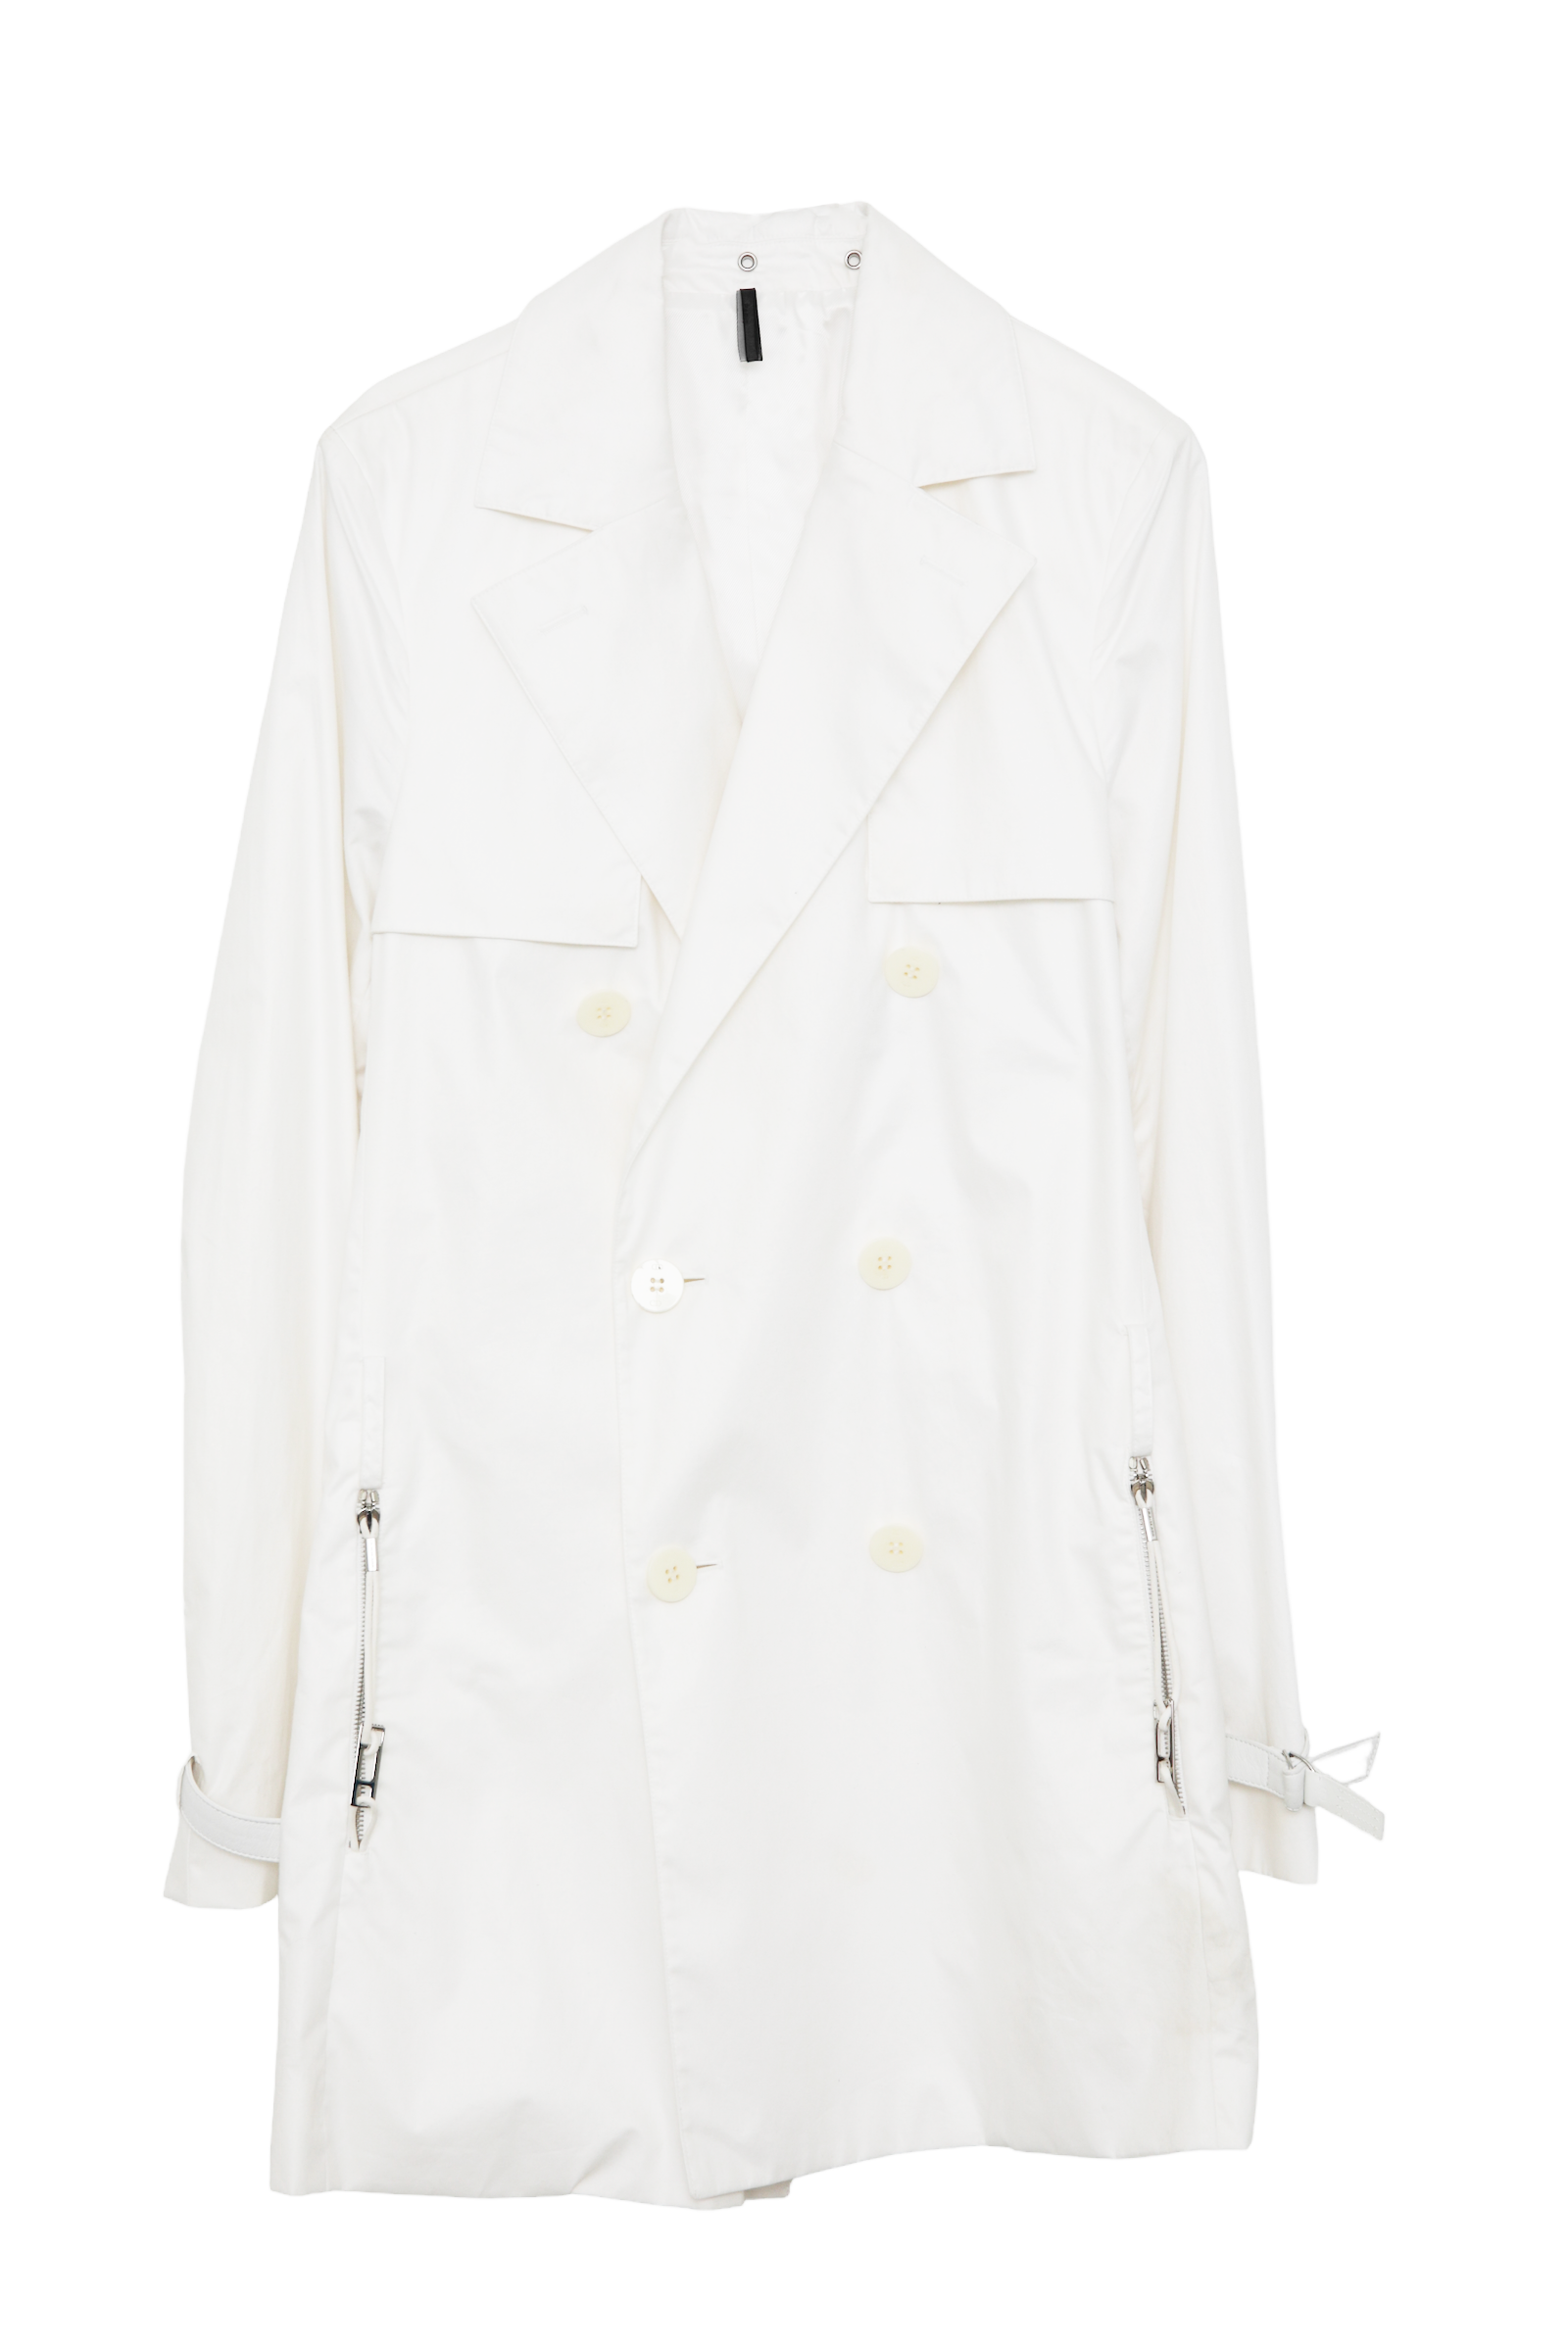 2004S/S DIOR HOMME BY HEDI SLIMONE TRENCH COAT